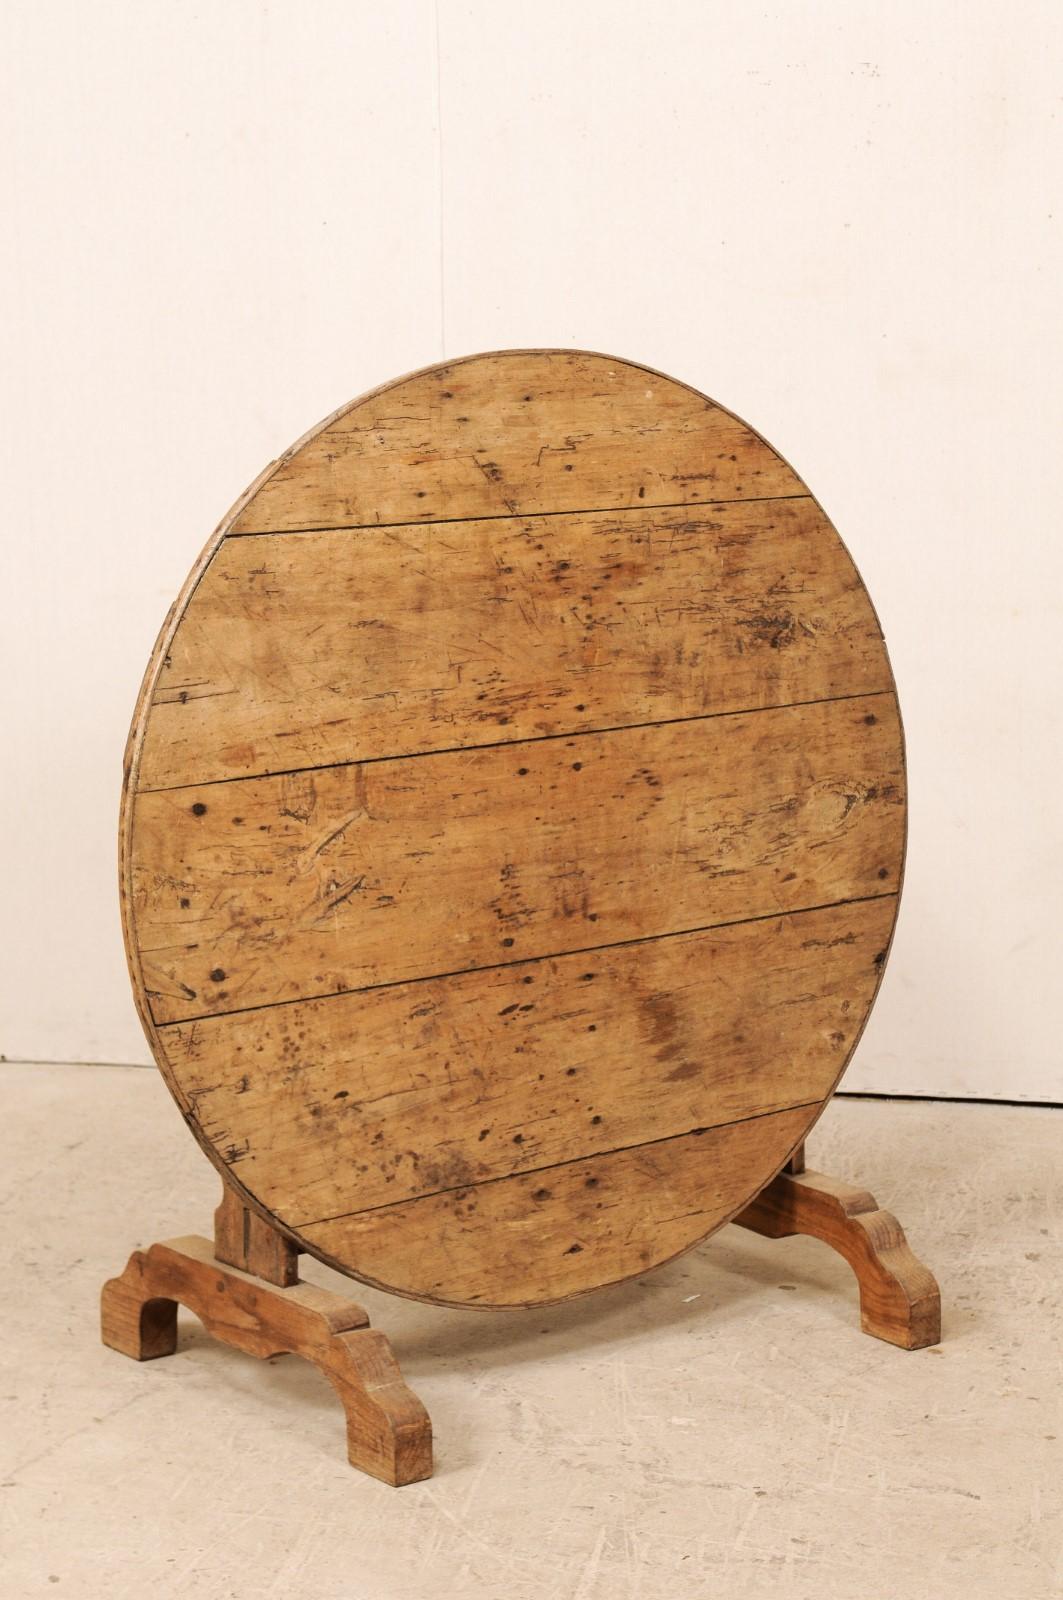 A vintage French vintner's wine tasting table. This French wine tasting table has the typical tilt top, and butterfly wedge support. The table is nicely raised and supported by its trestle base and thickly carved legs. The wood is a beautiful light